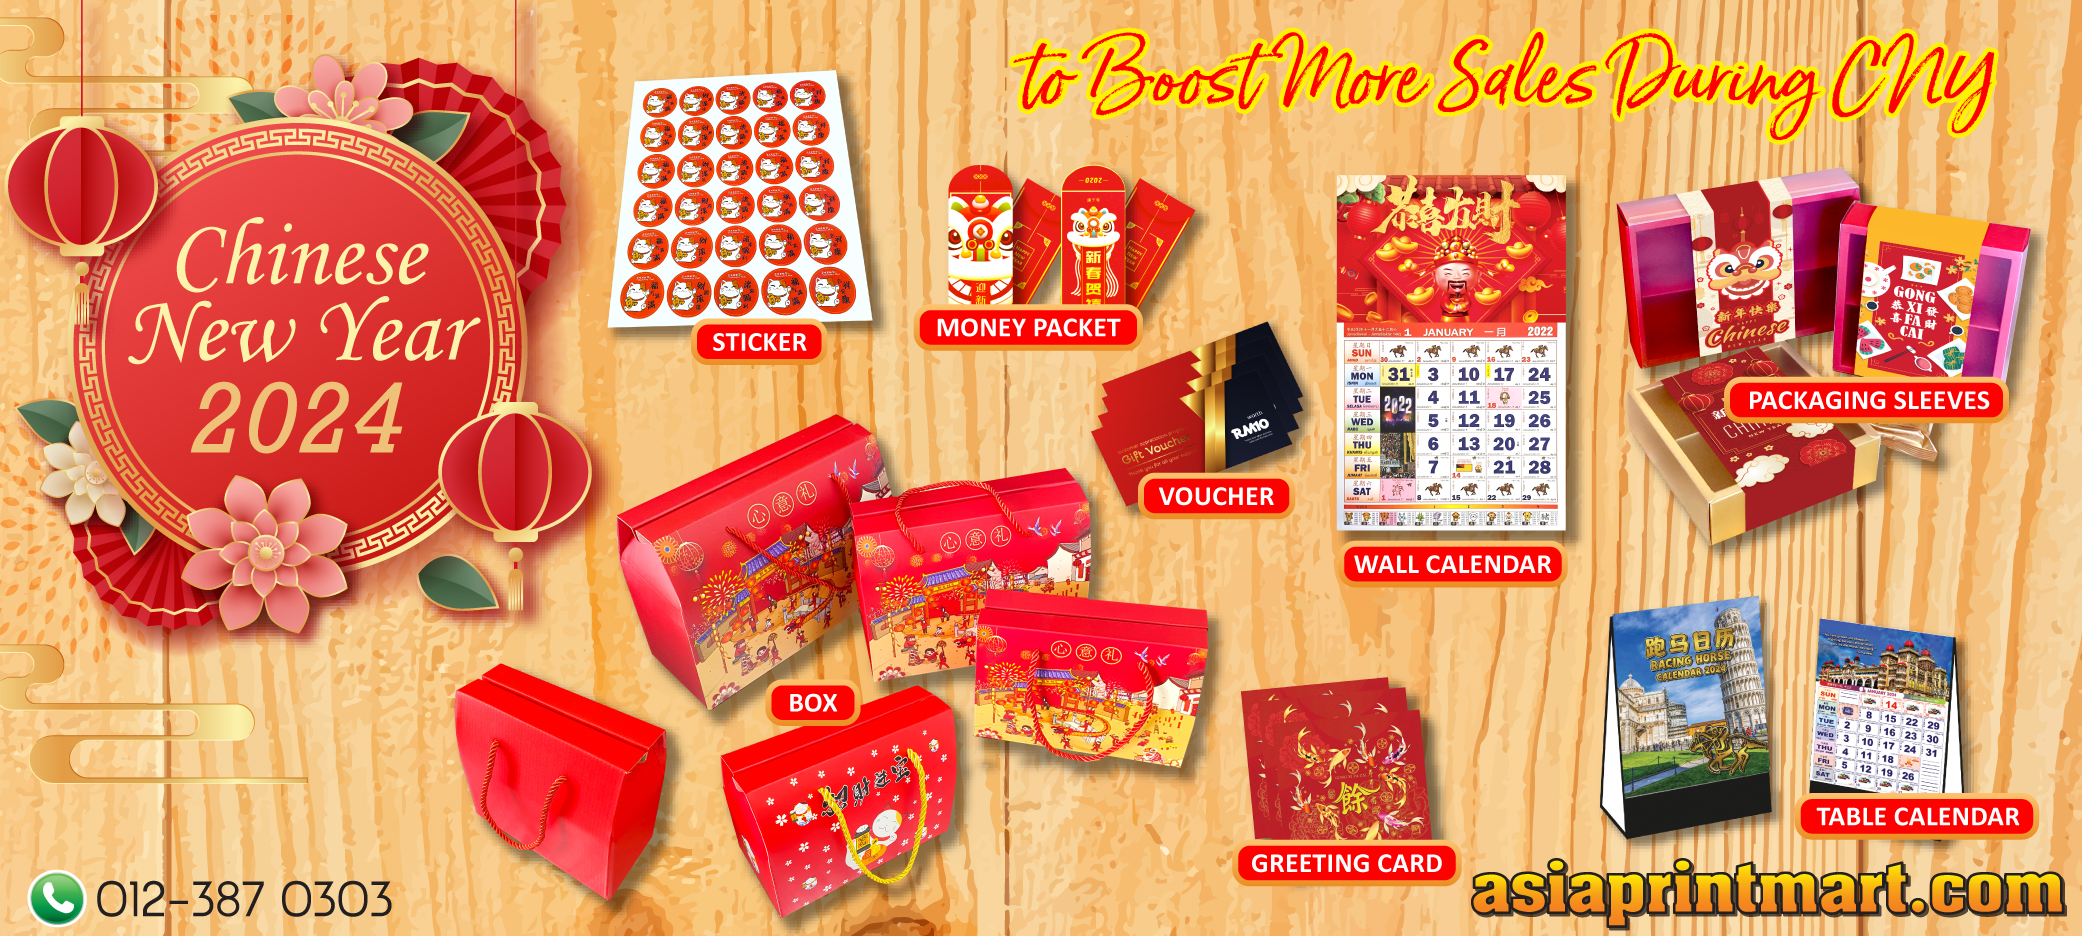 CNY PRINTING PACKAGING BOXES | PRINTING CNY GIFT BOXES | Print Packing Box | Print Money Packets | Print Ang Pow | Printing promotion vouchers | Print cookies gift box | print red box | print red paper bags | print chinese calendars | ??????? | ?????? | 2022 ???????